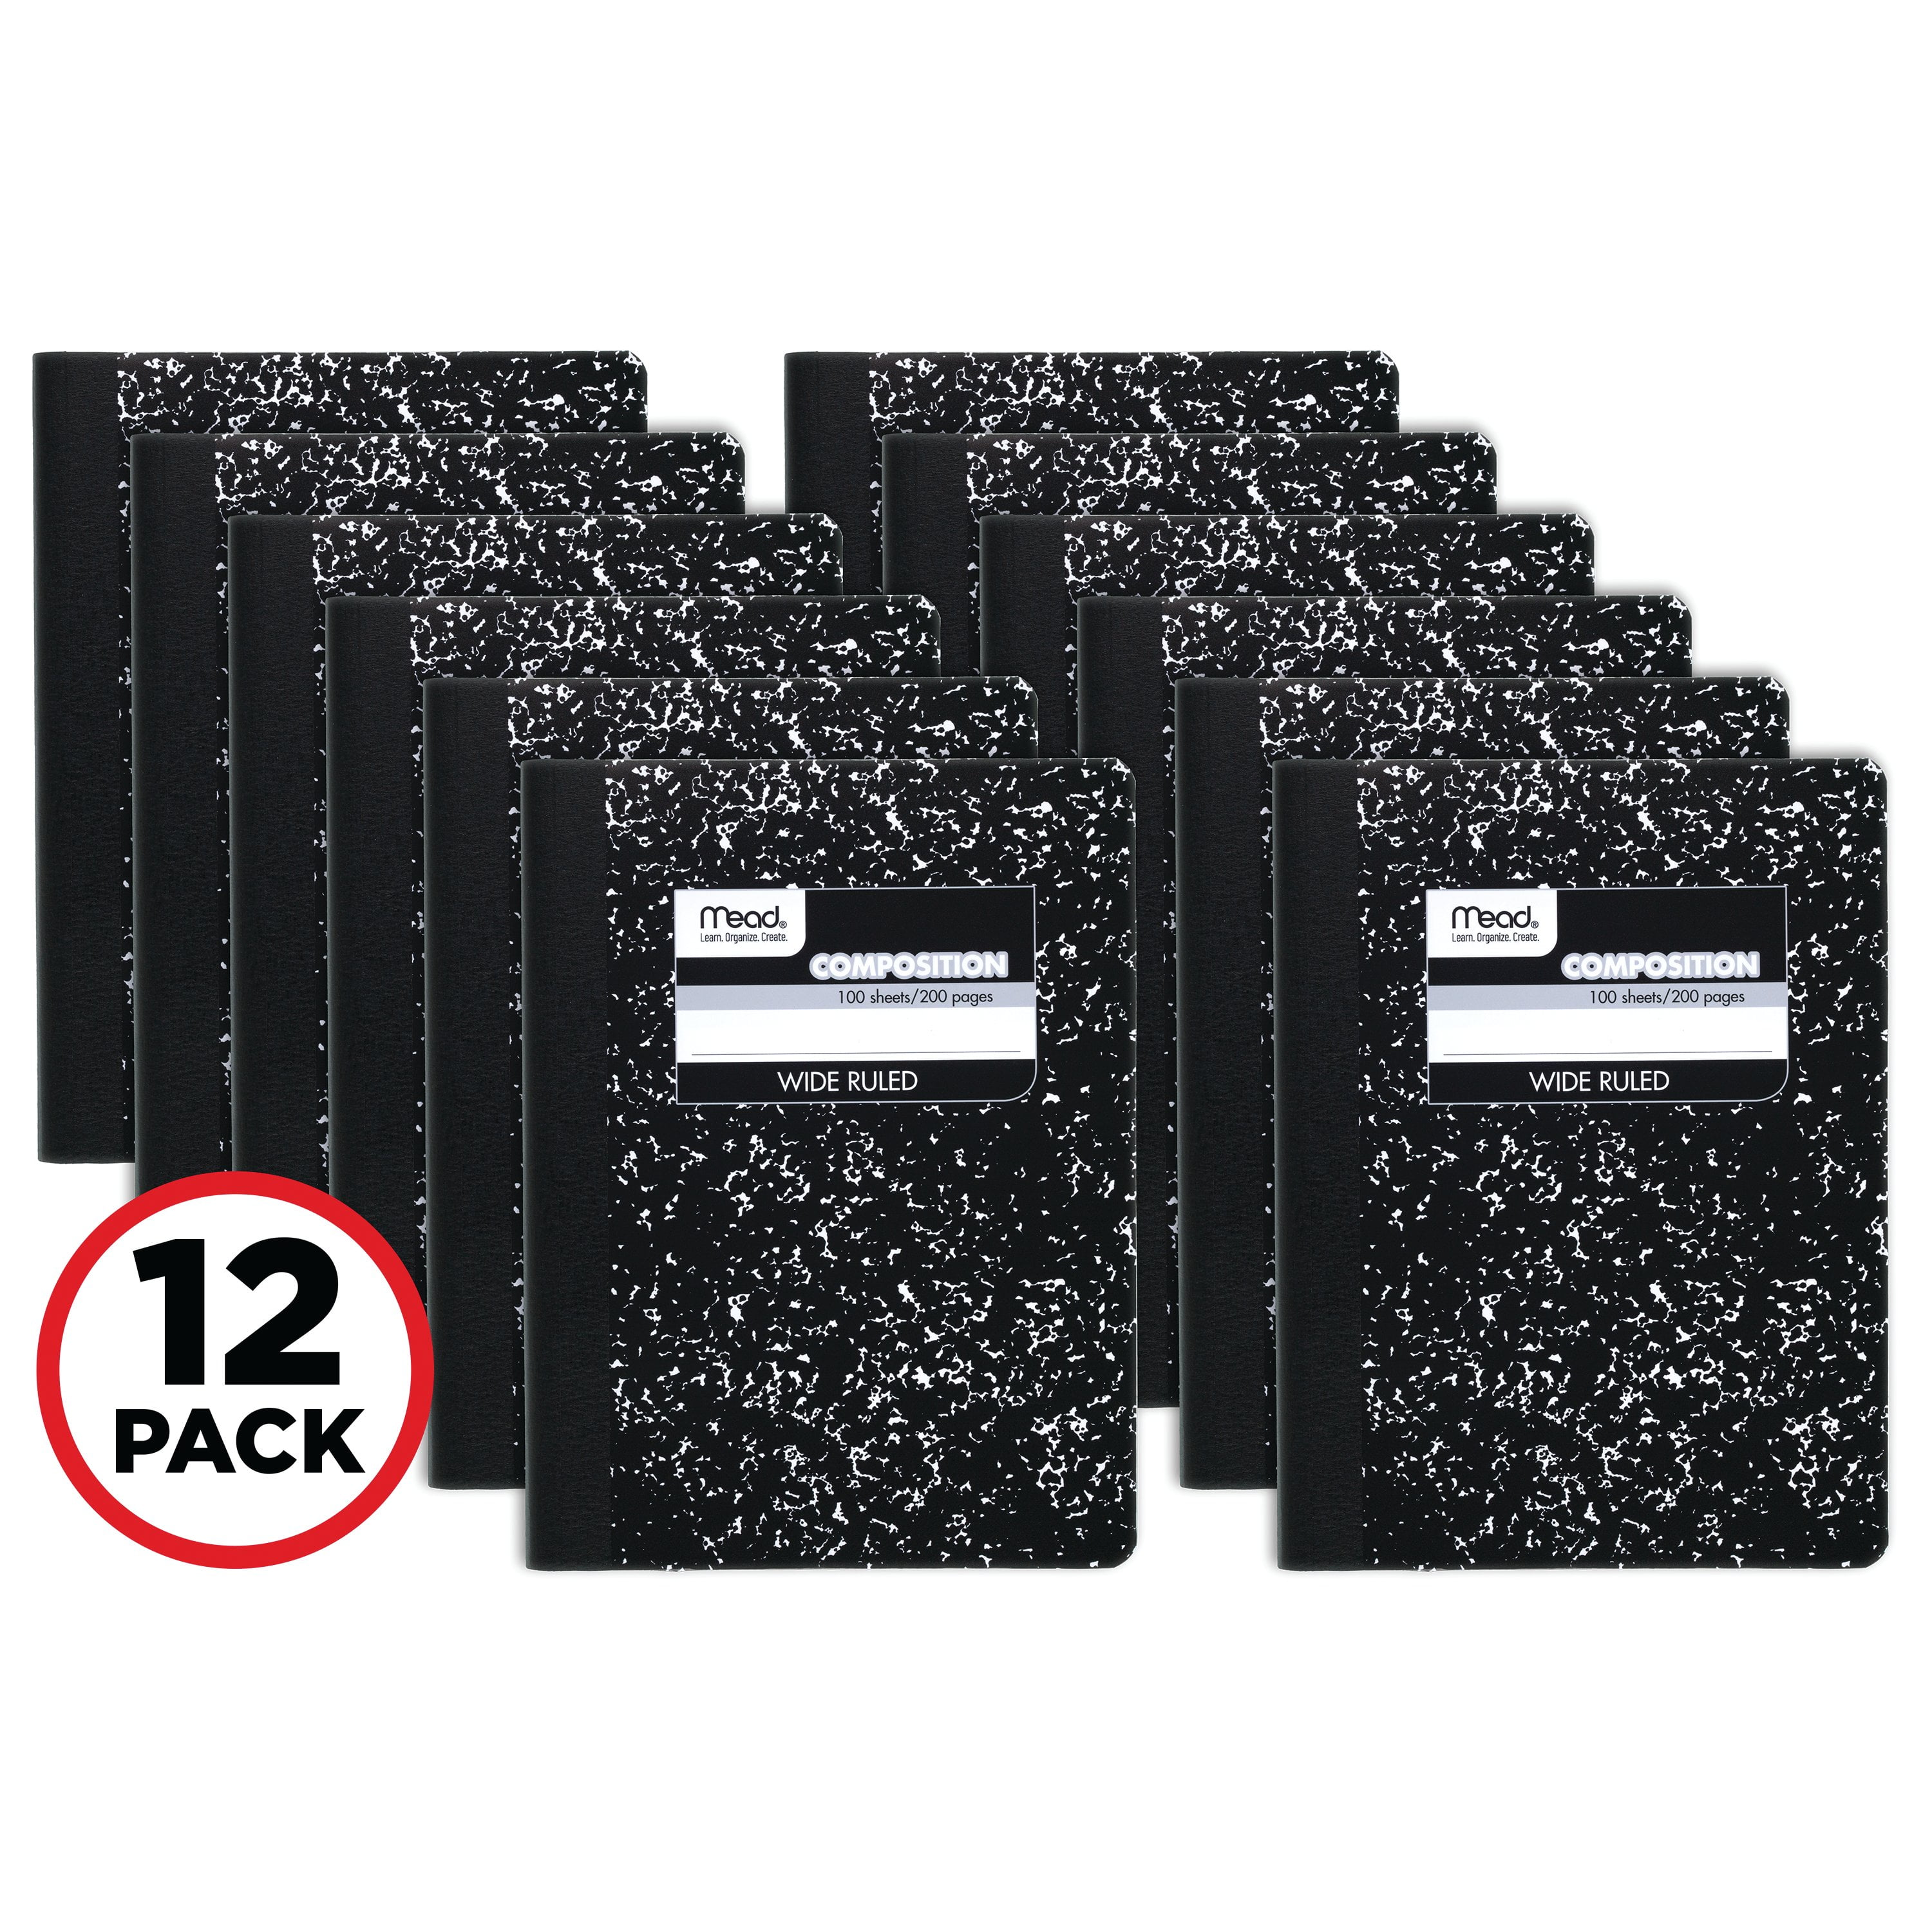 4 Pack Composition Notebooks Black Book School Supplies 100 Sheets 200 Pages USA 